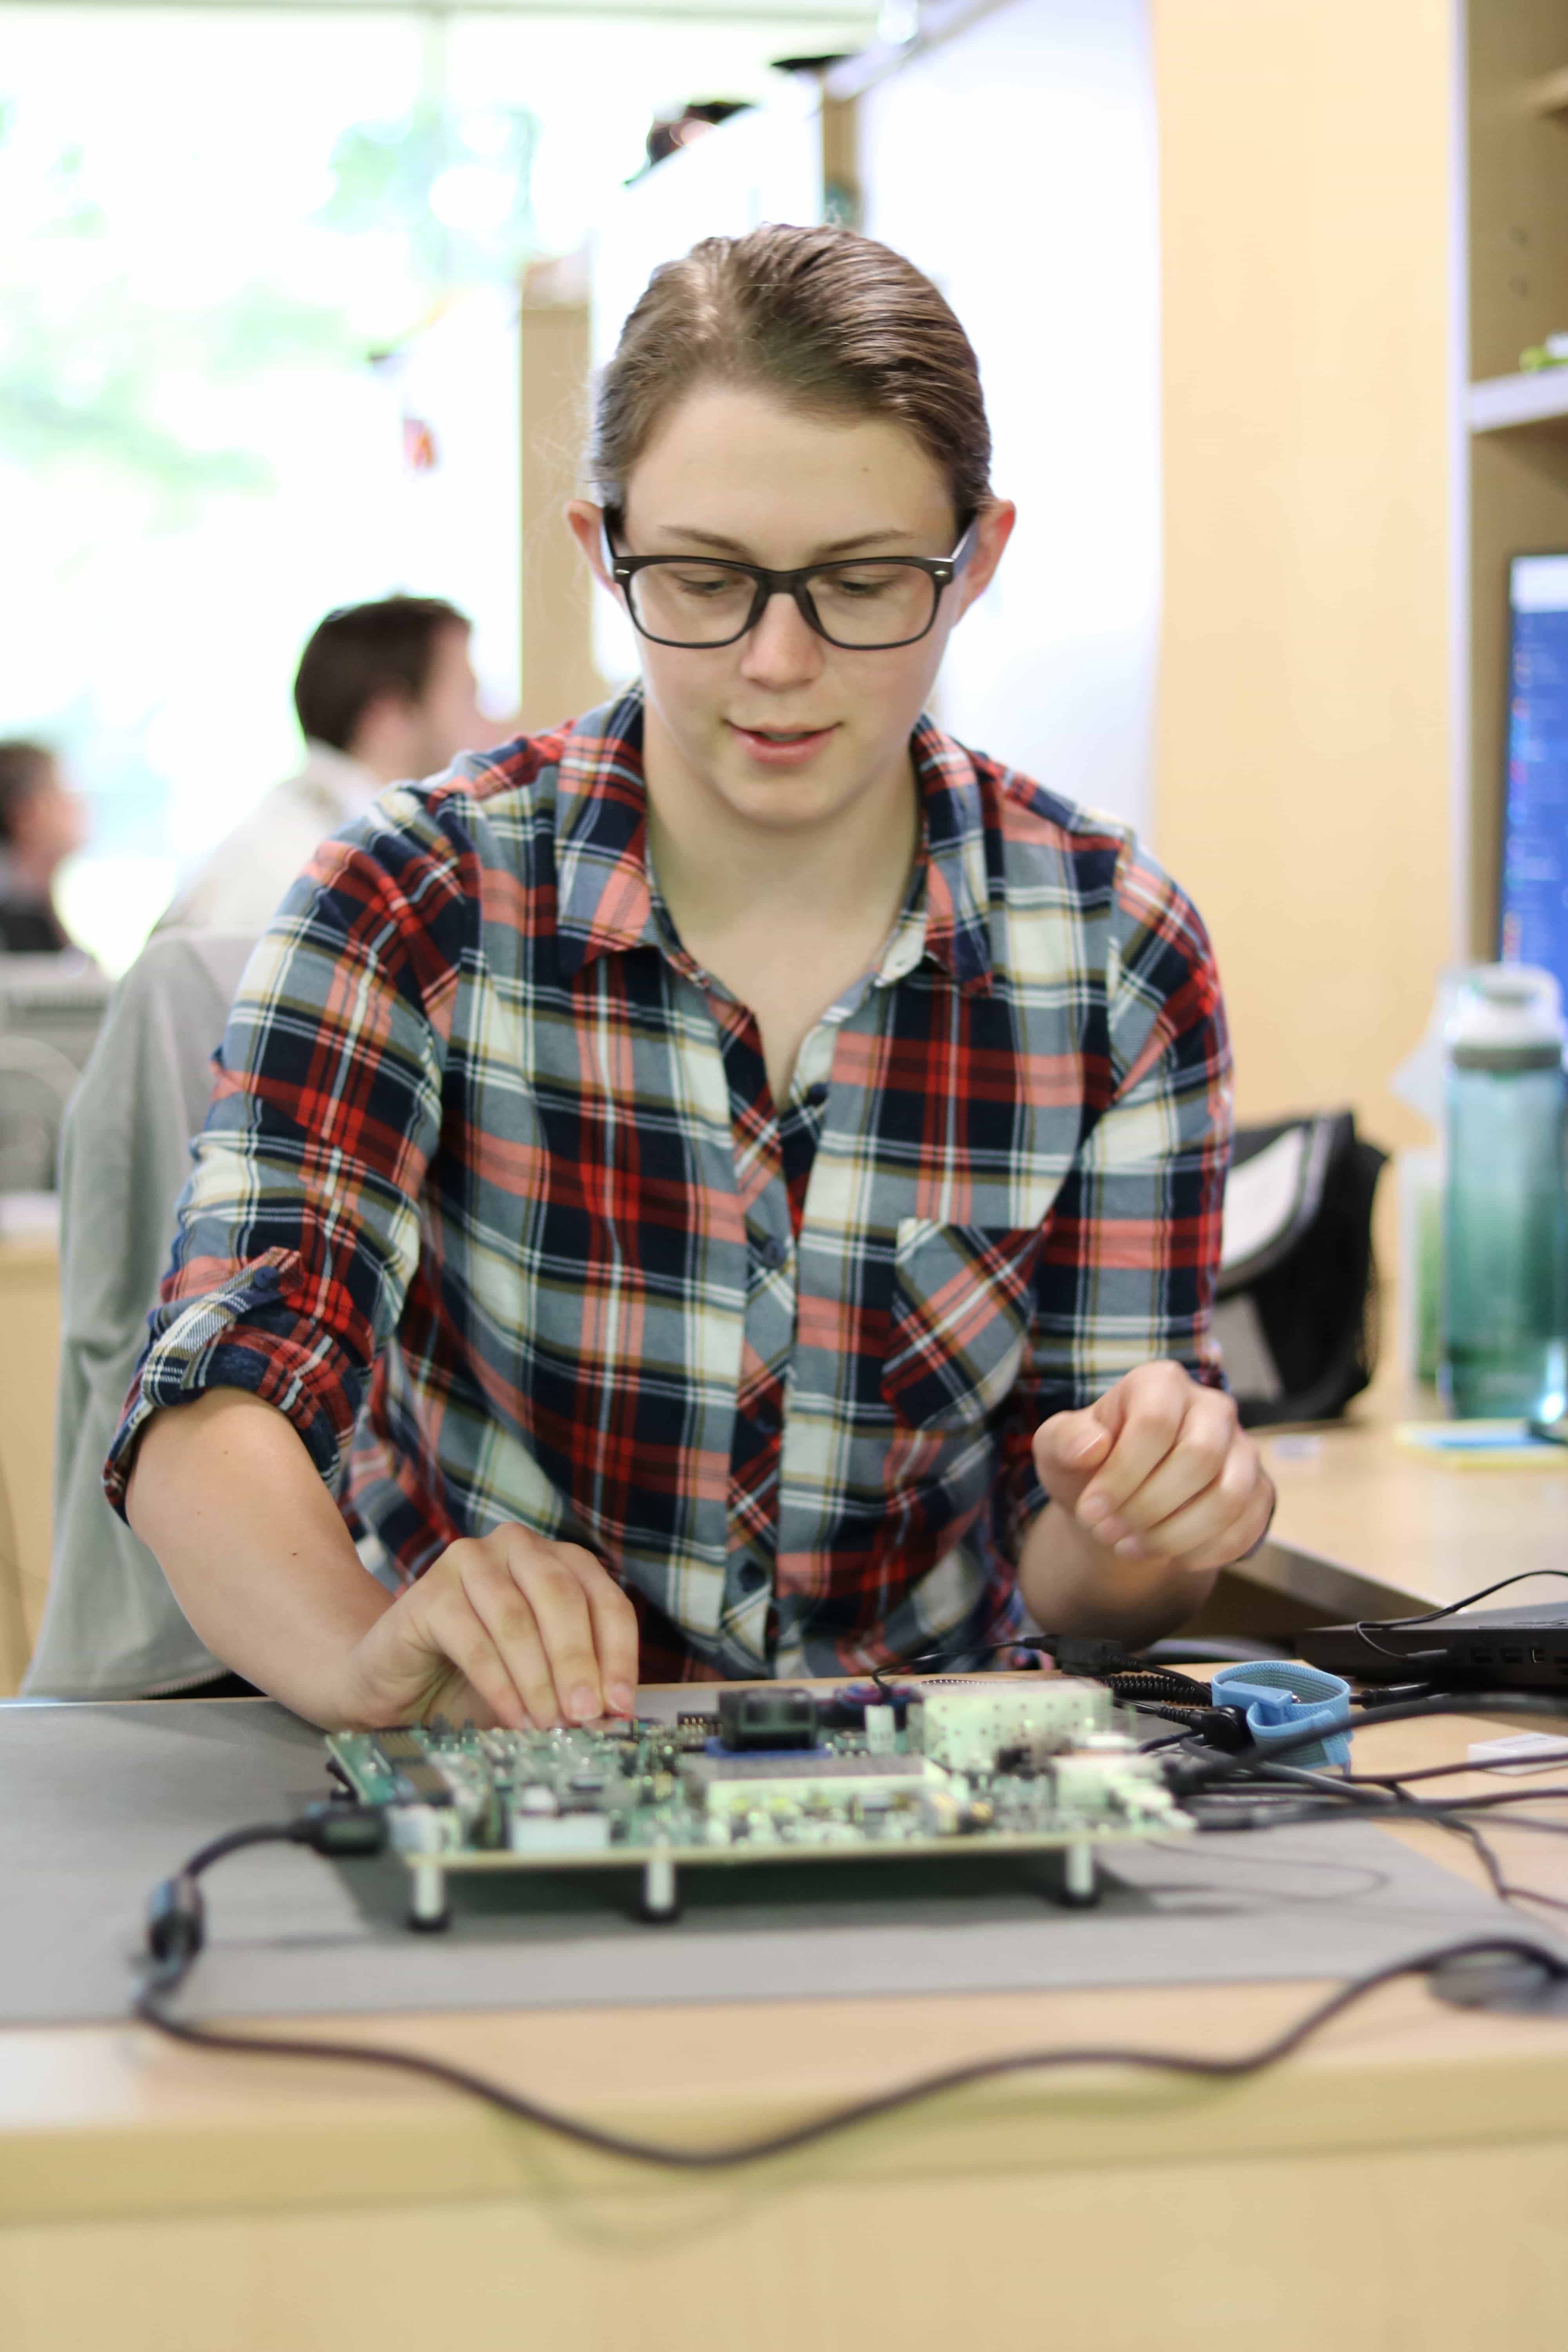 Embedded engineer Anna Little works with the Xilinx Zynq UltraScale+ MPSoC.